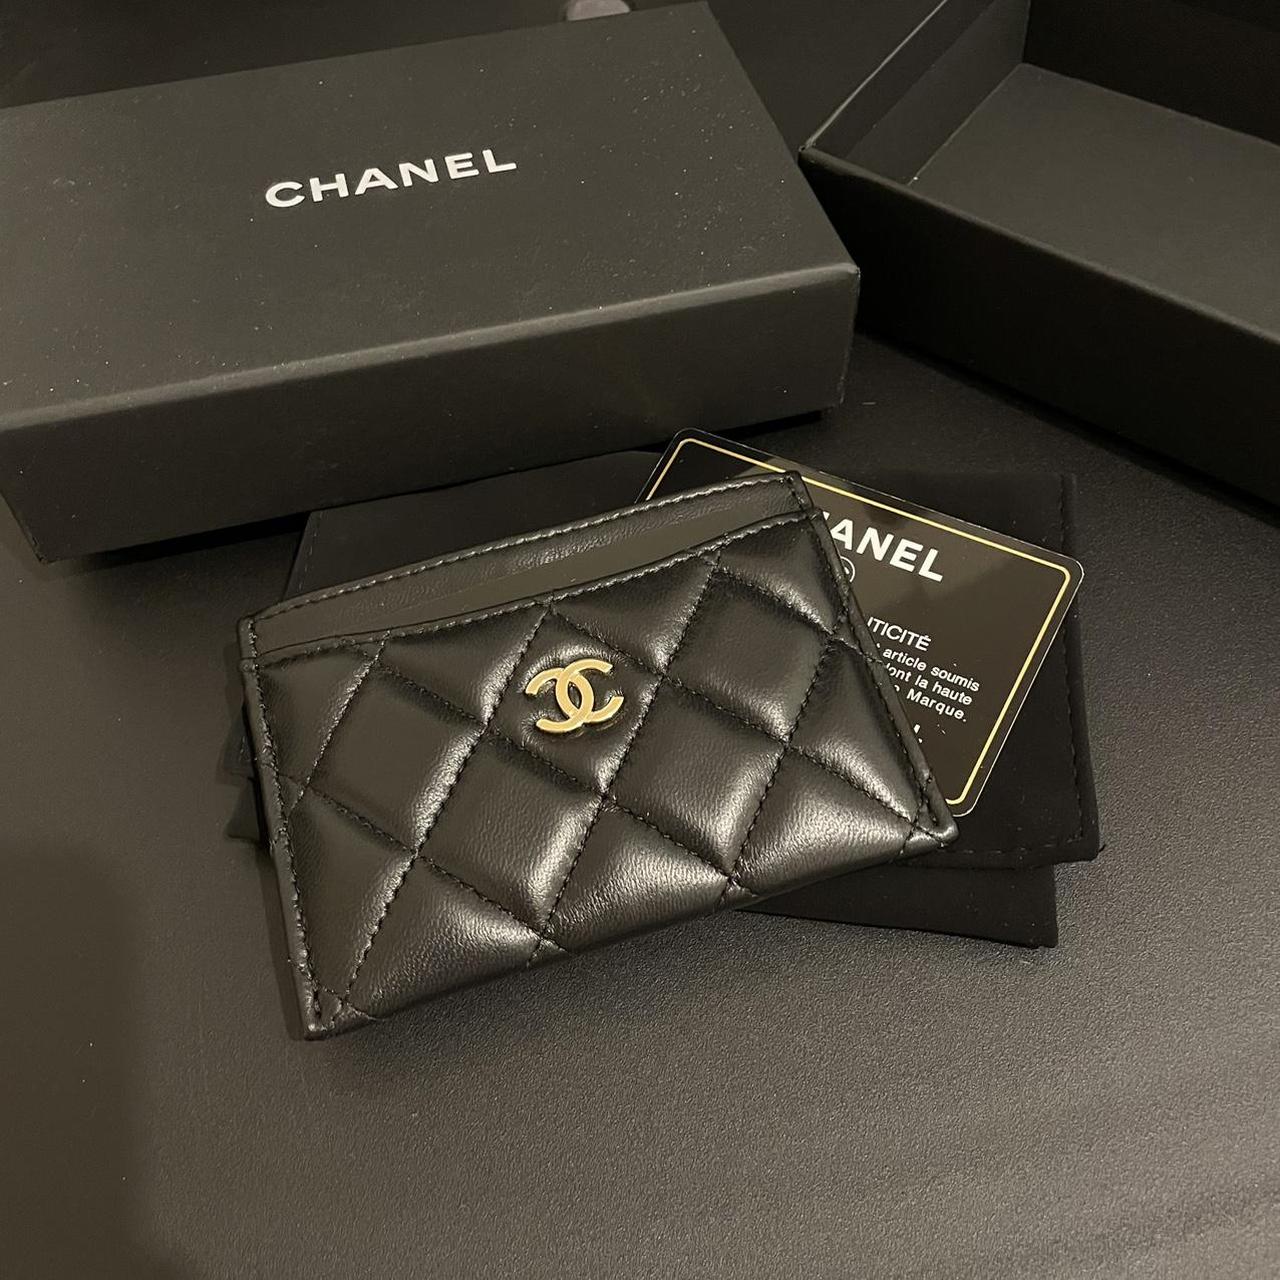 CHANEL GIFT CARD 2852.50